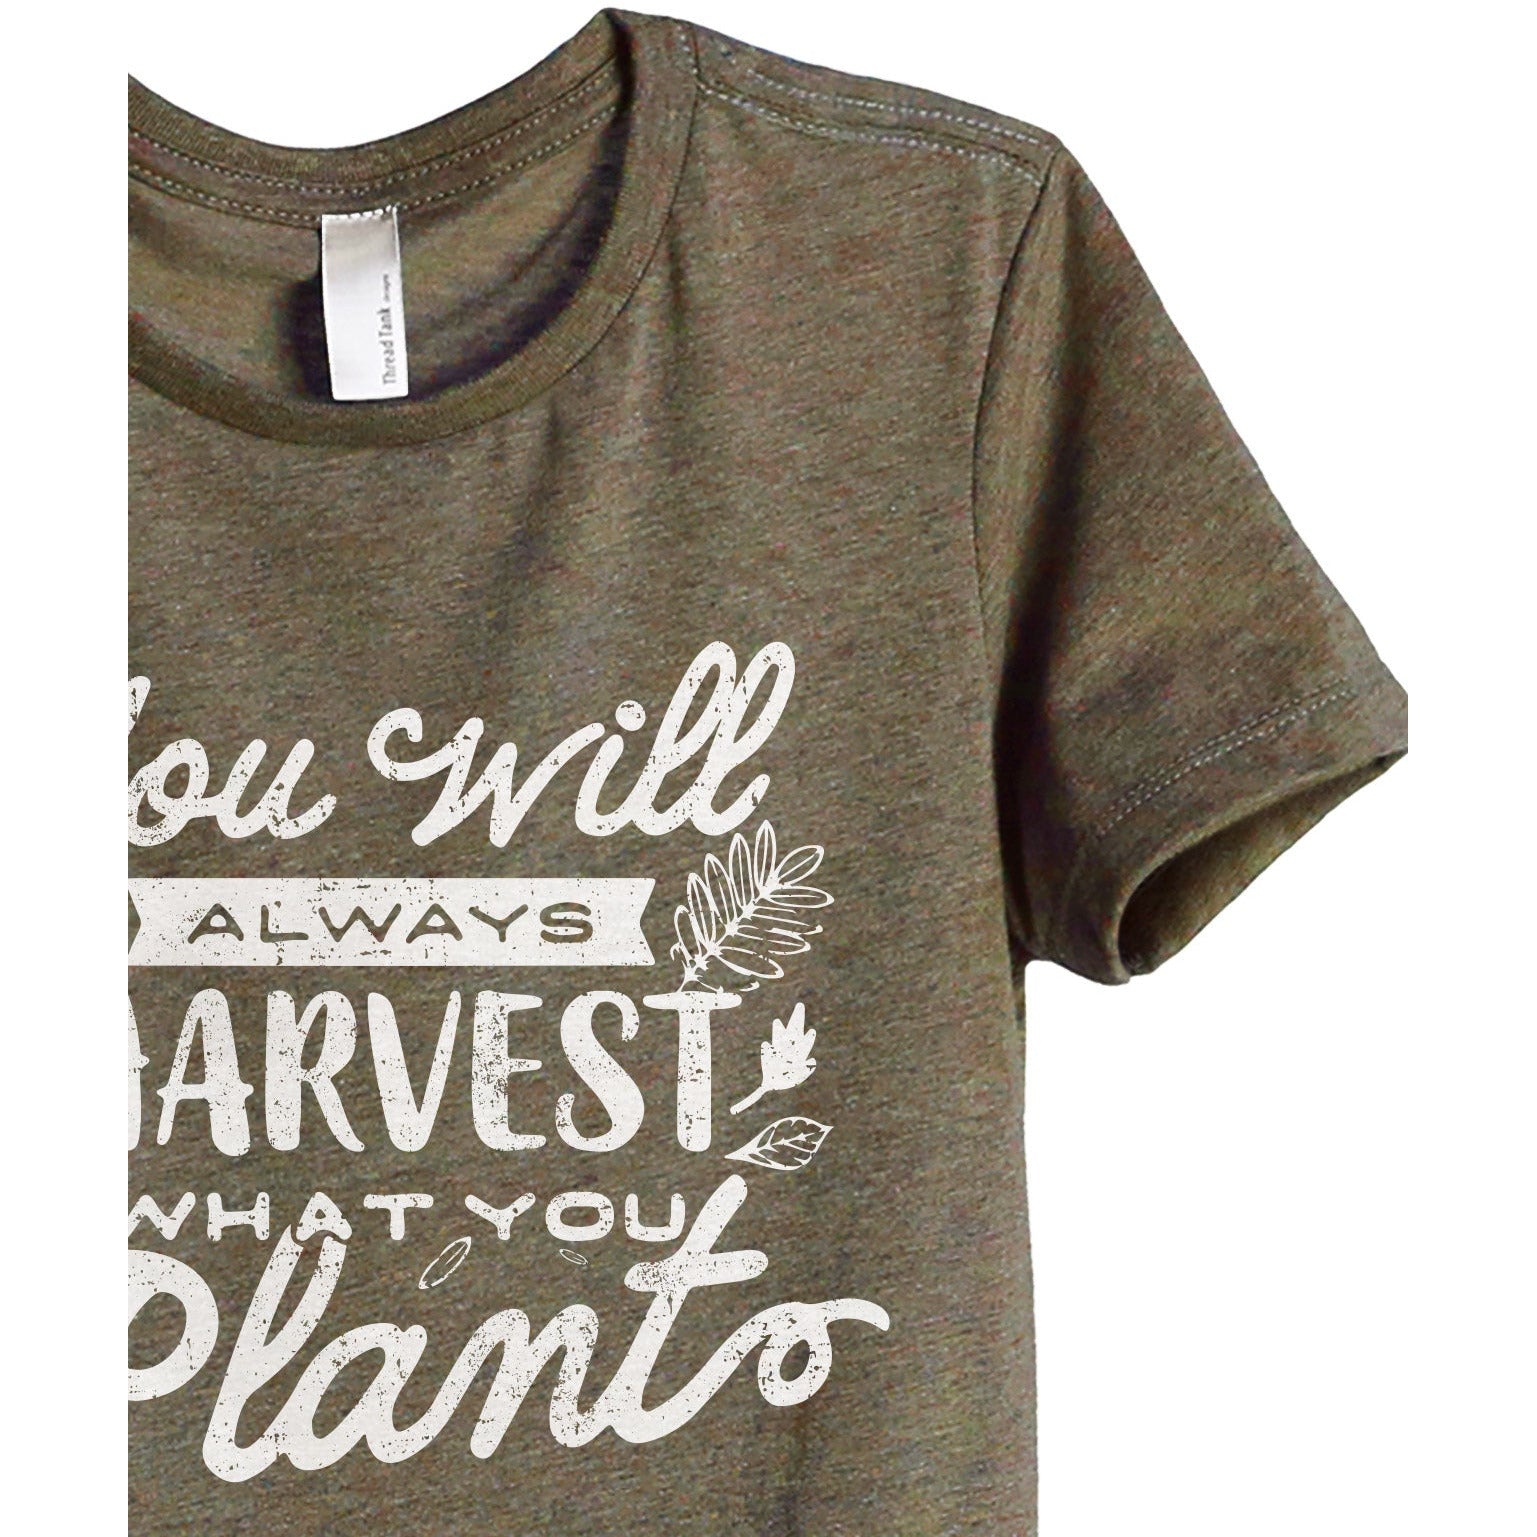 You Will Always Harvest What You Plant - Stories You Can Wear